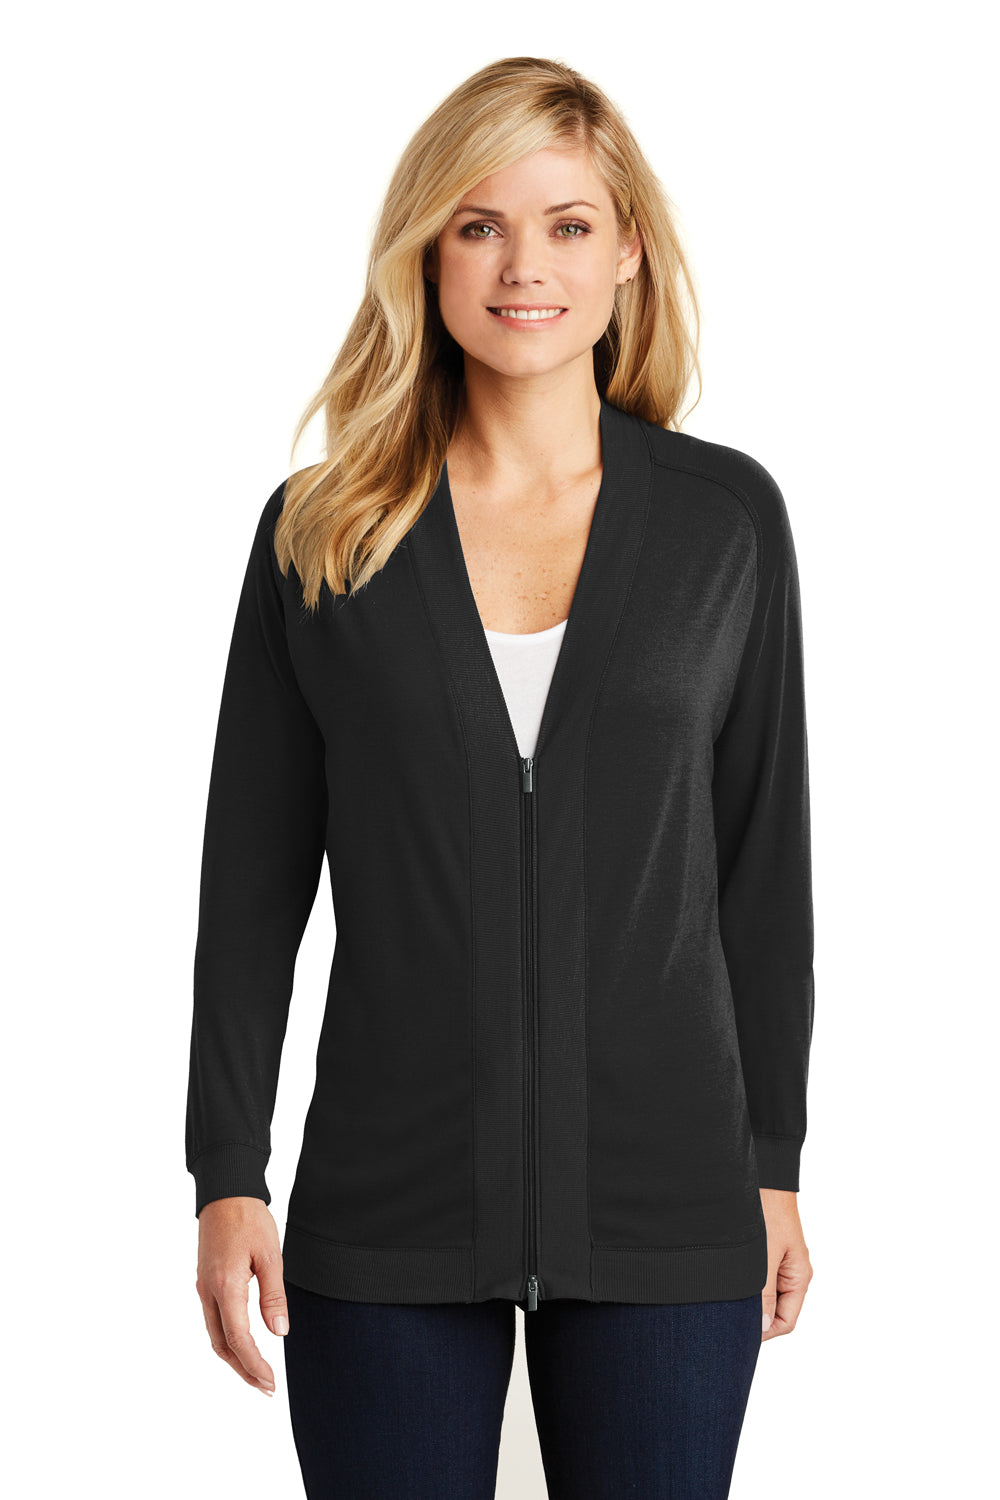 Port Authority LK5431 Womens Concept Bomber Long Sleeve Cardigan Sweater Black Front